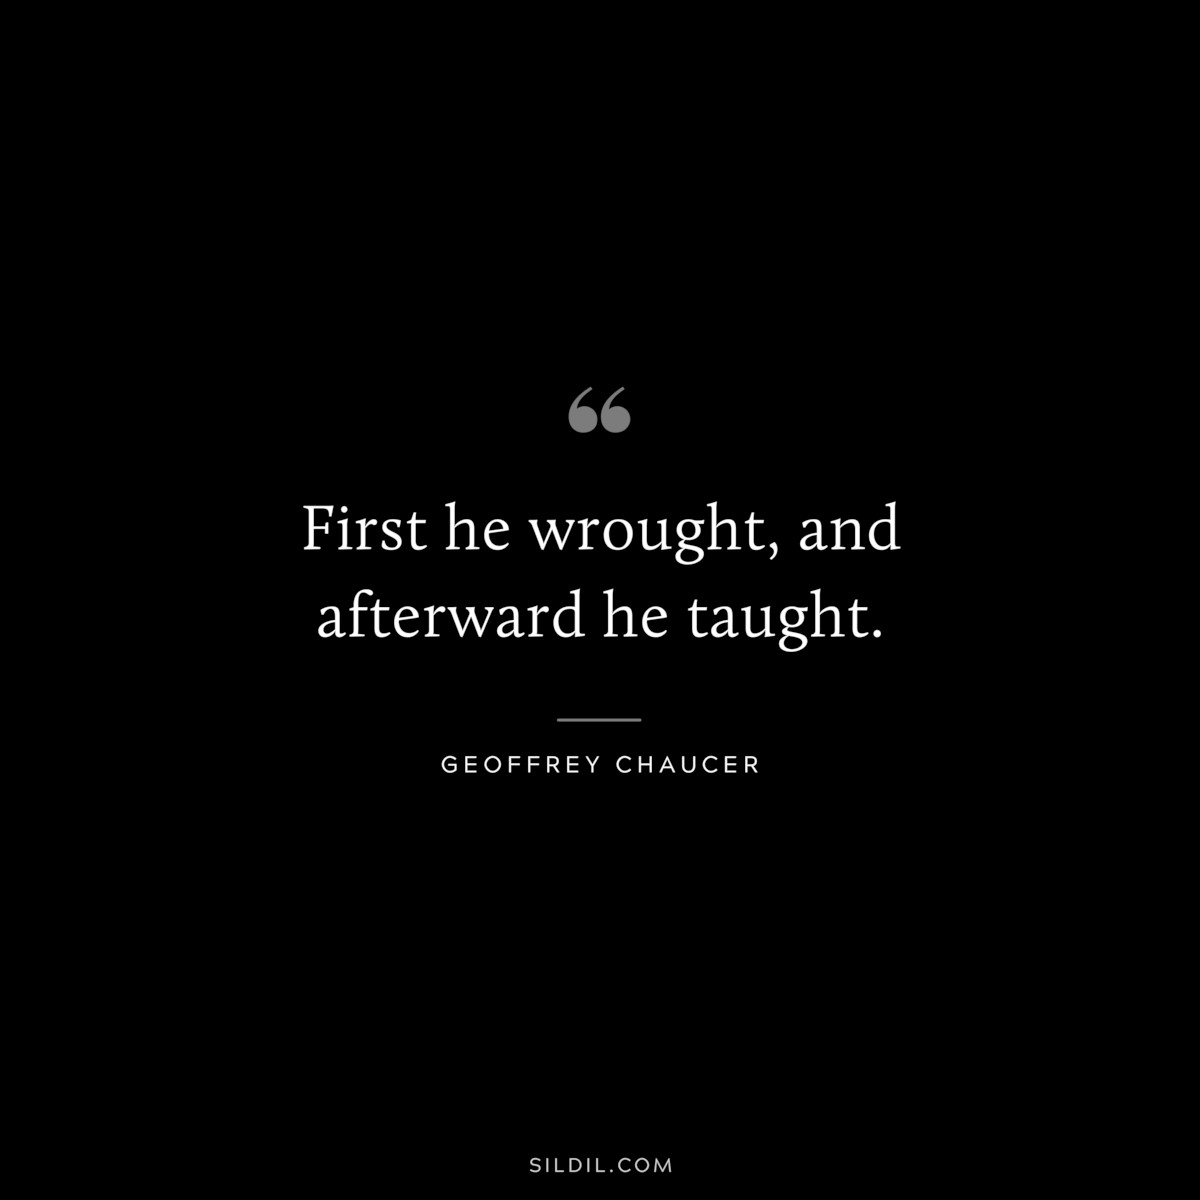 First he wrought, and afterward he taught. ― Geoffrey Chaucer